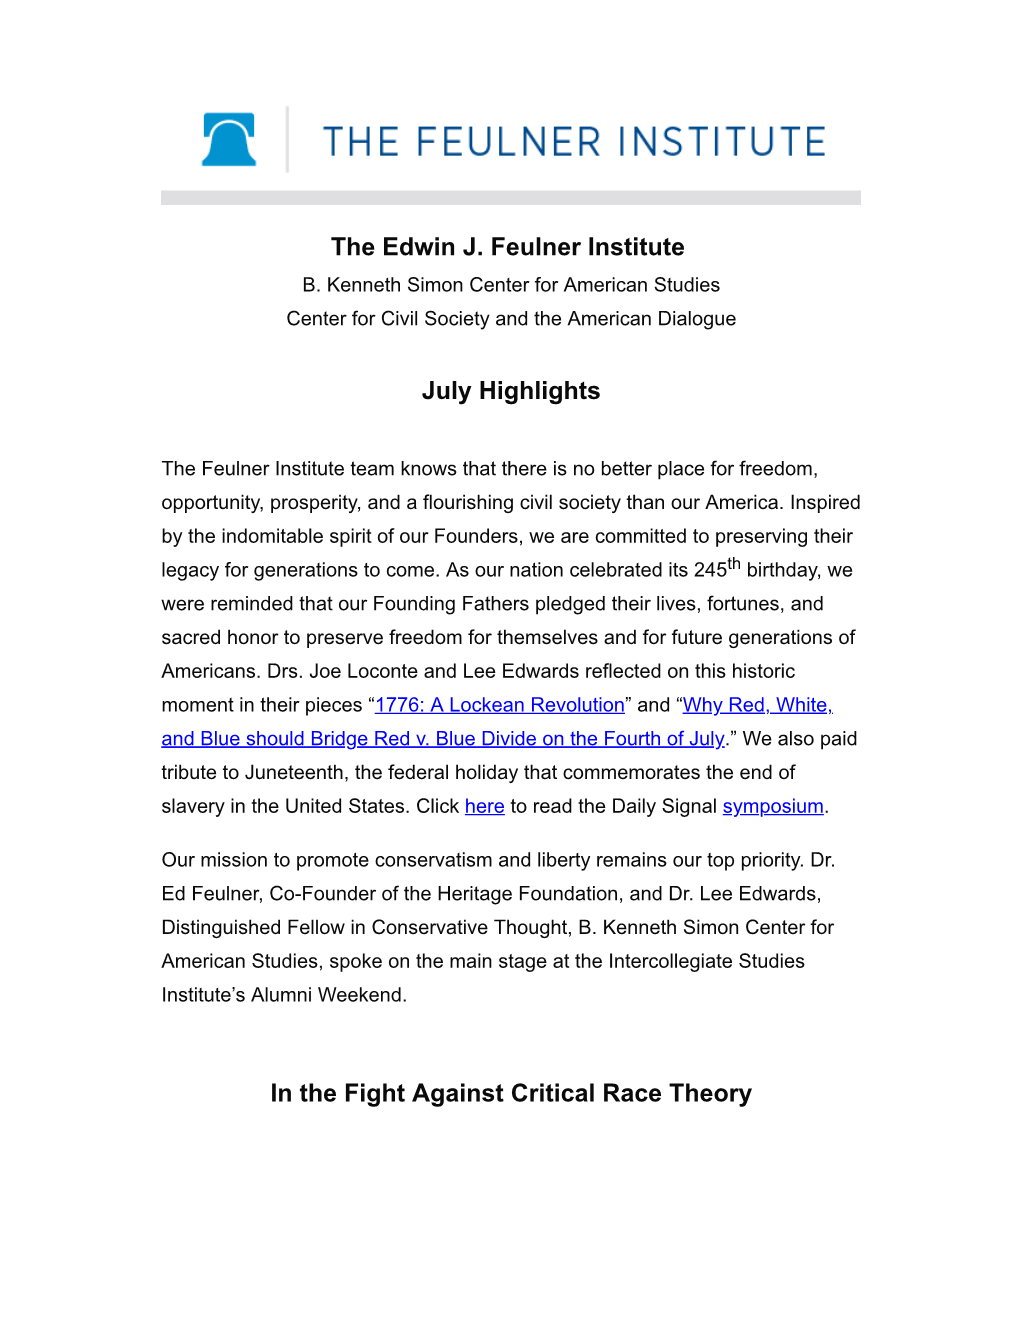 The Edwin J. Feulner Institute July Highlights in the Fight Against